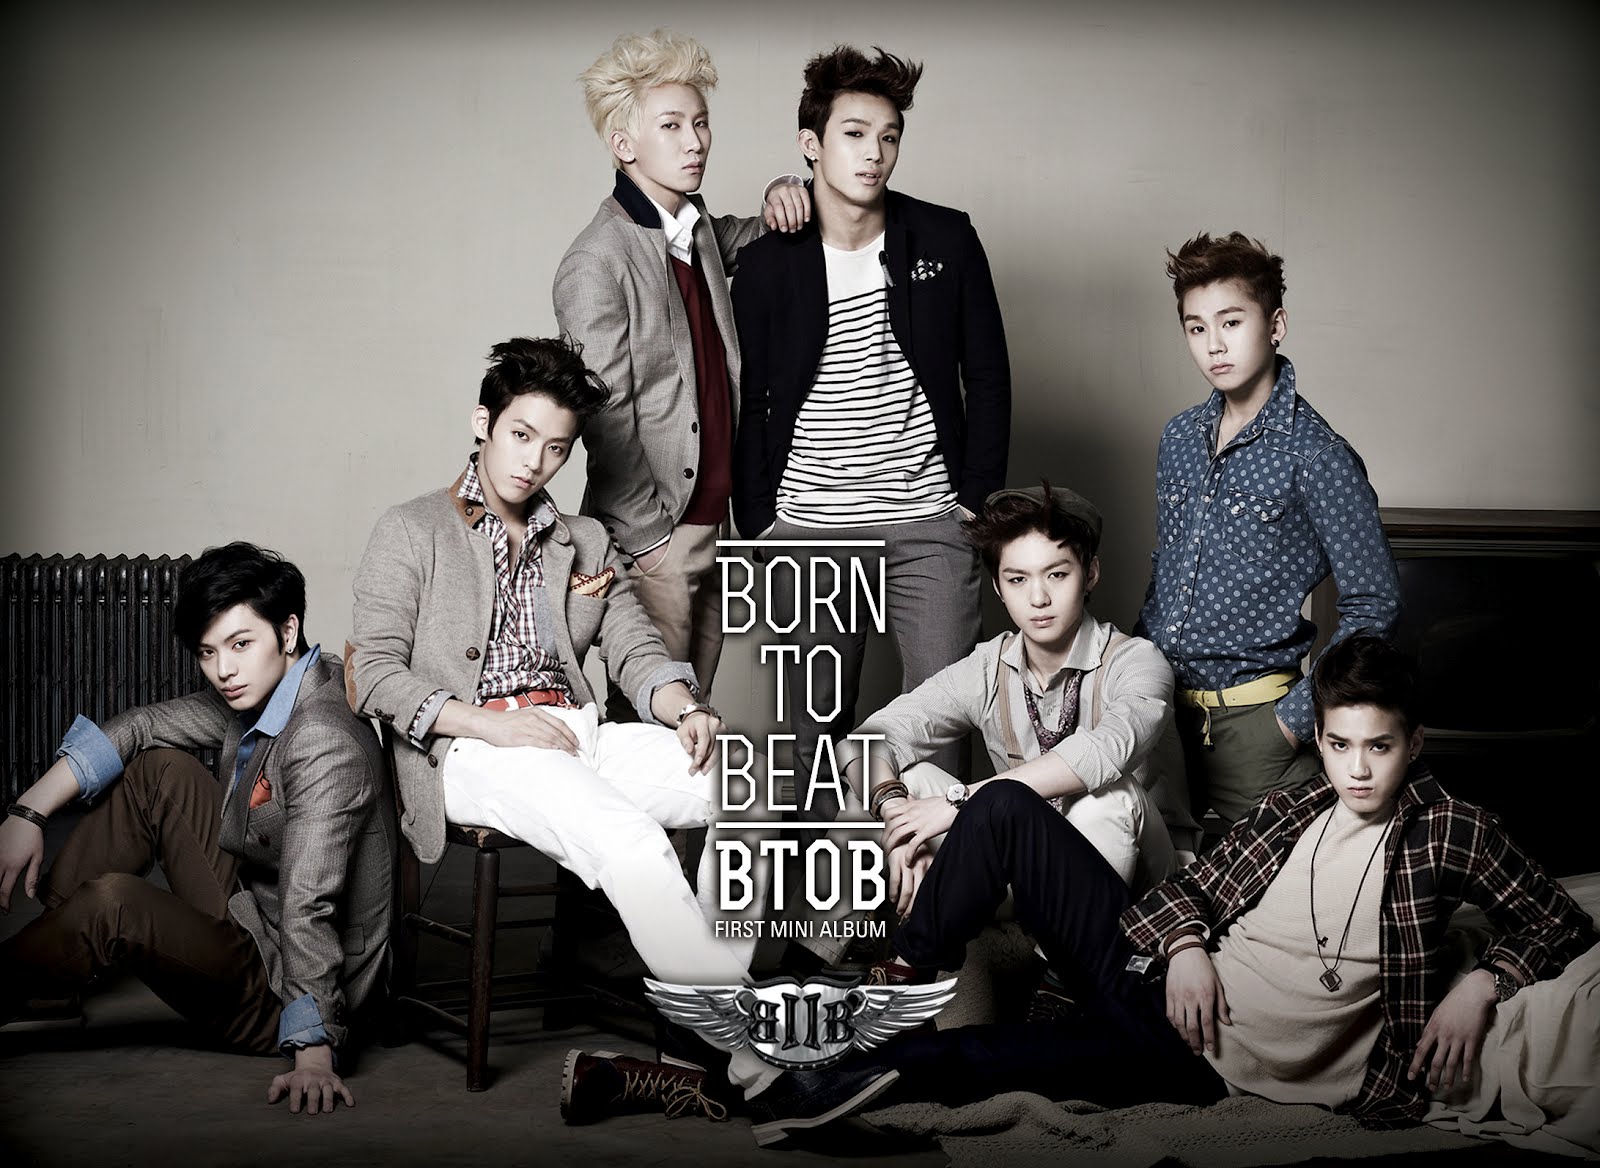 Kpop Image Btob Born To Beat HD Wallpaper And Background